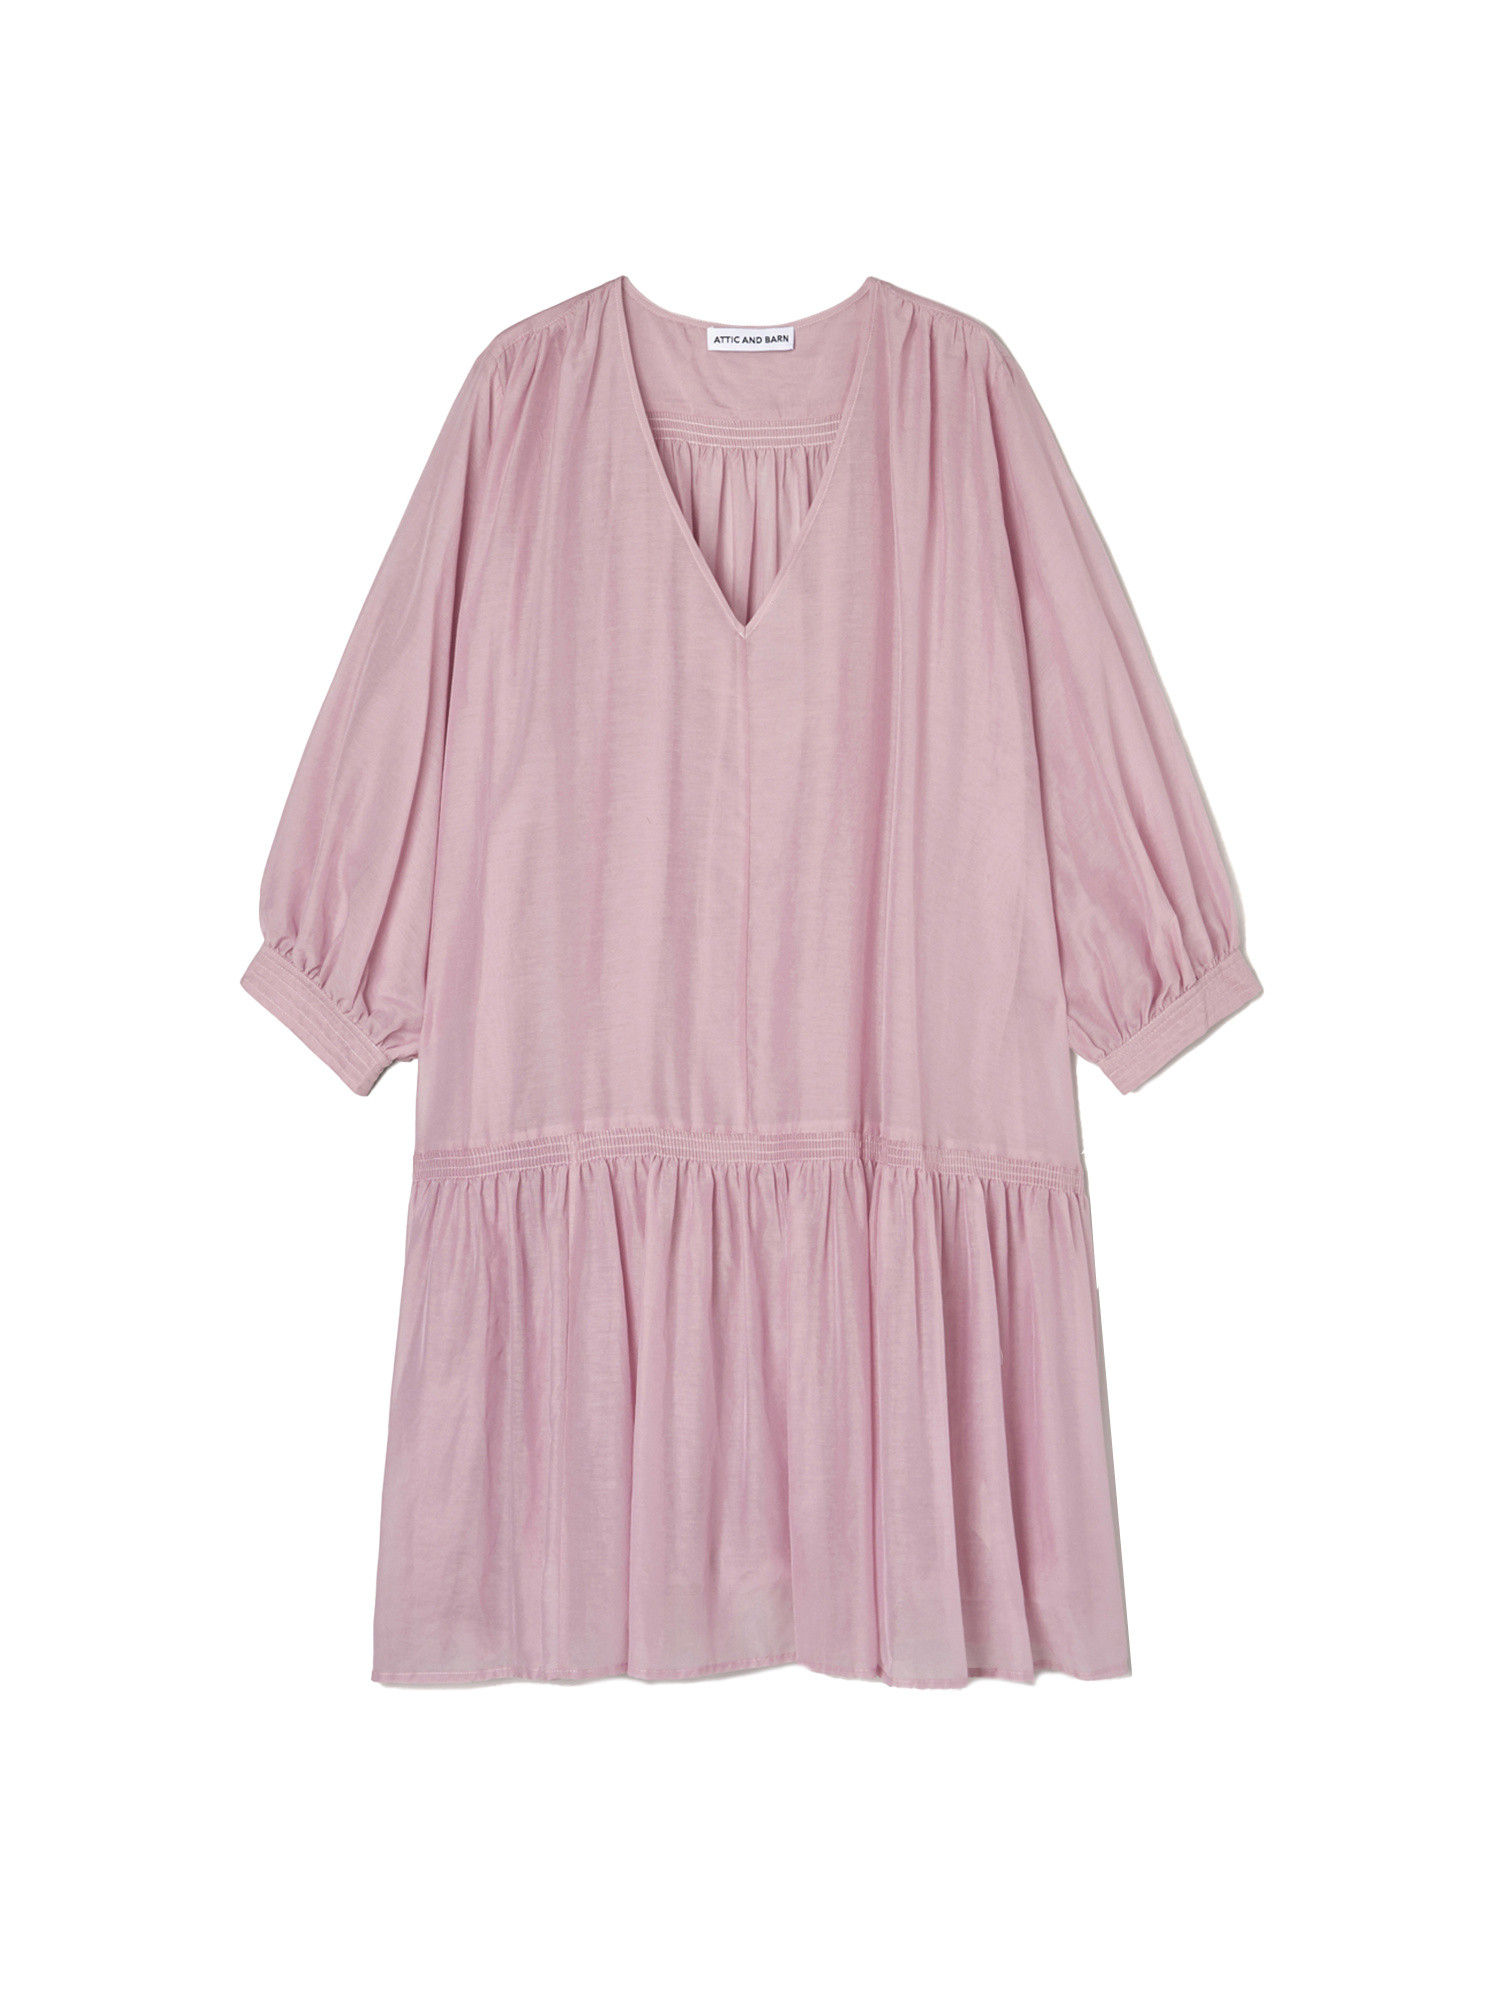 Attic and Barn - Fidel dress in cotton and silk, Mauve purple, large image number 0